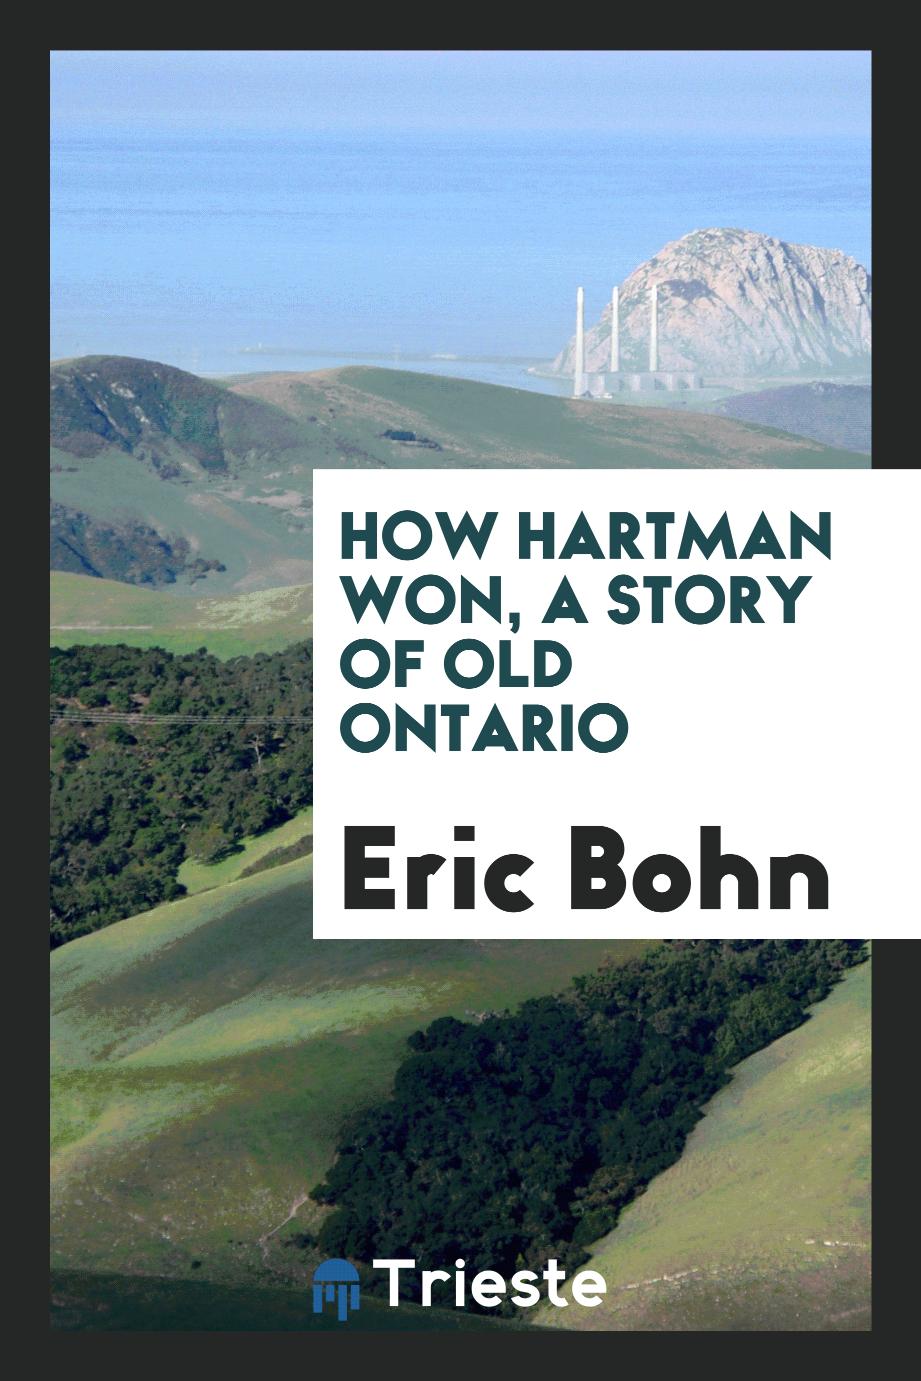 How Hartman won, a story of old Ontario